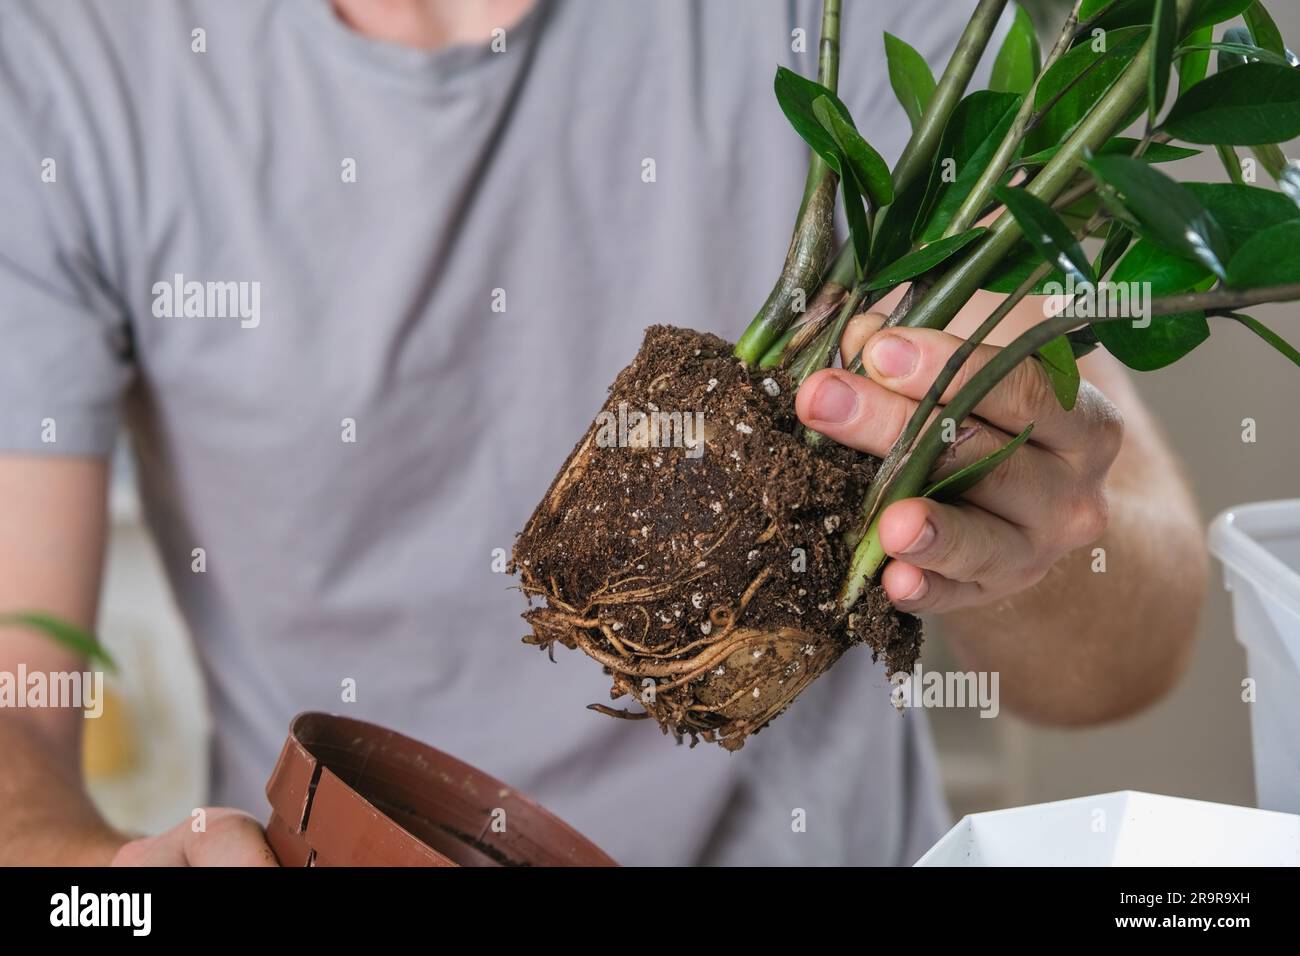 Transplanting Zamioculcas from a small pot to a large one. A man pulls a houseplant out of an old pot. Spring gardening. Stock Photo